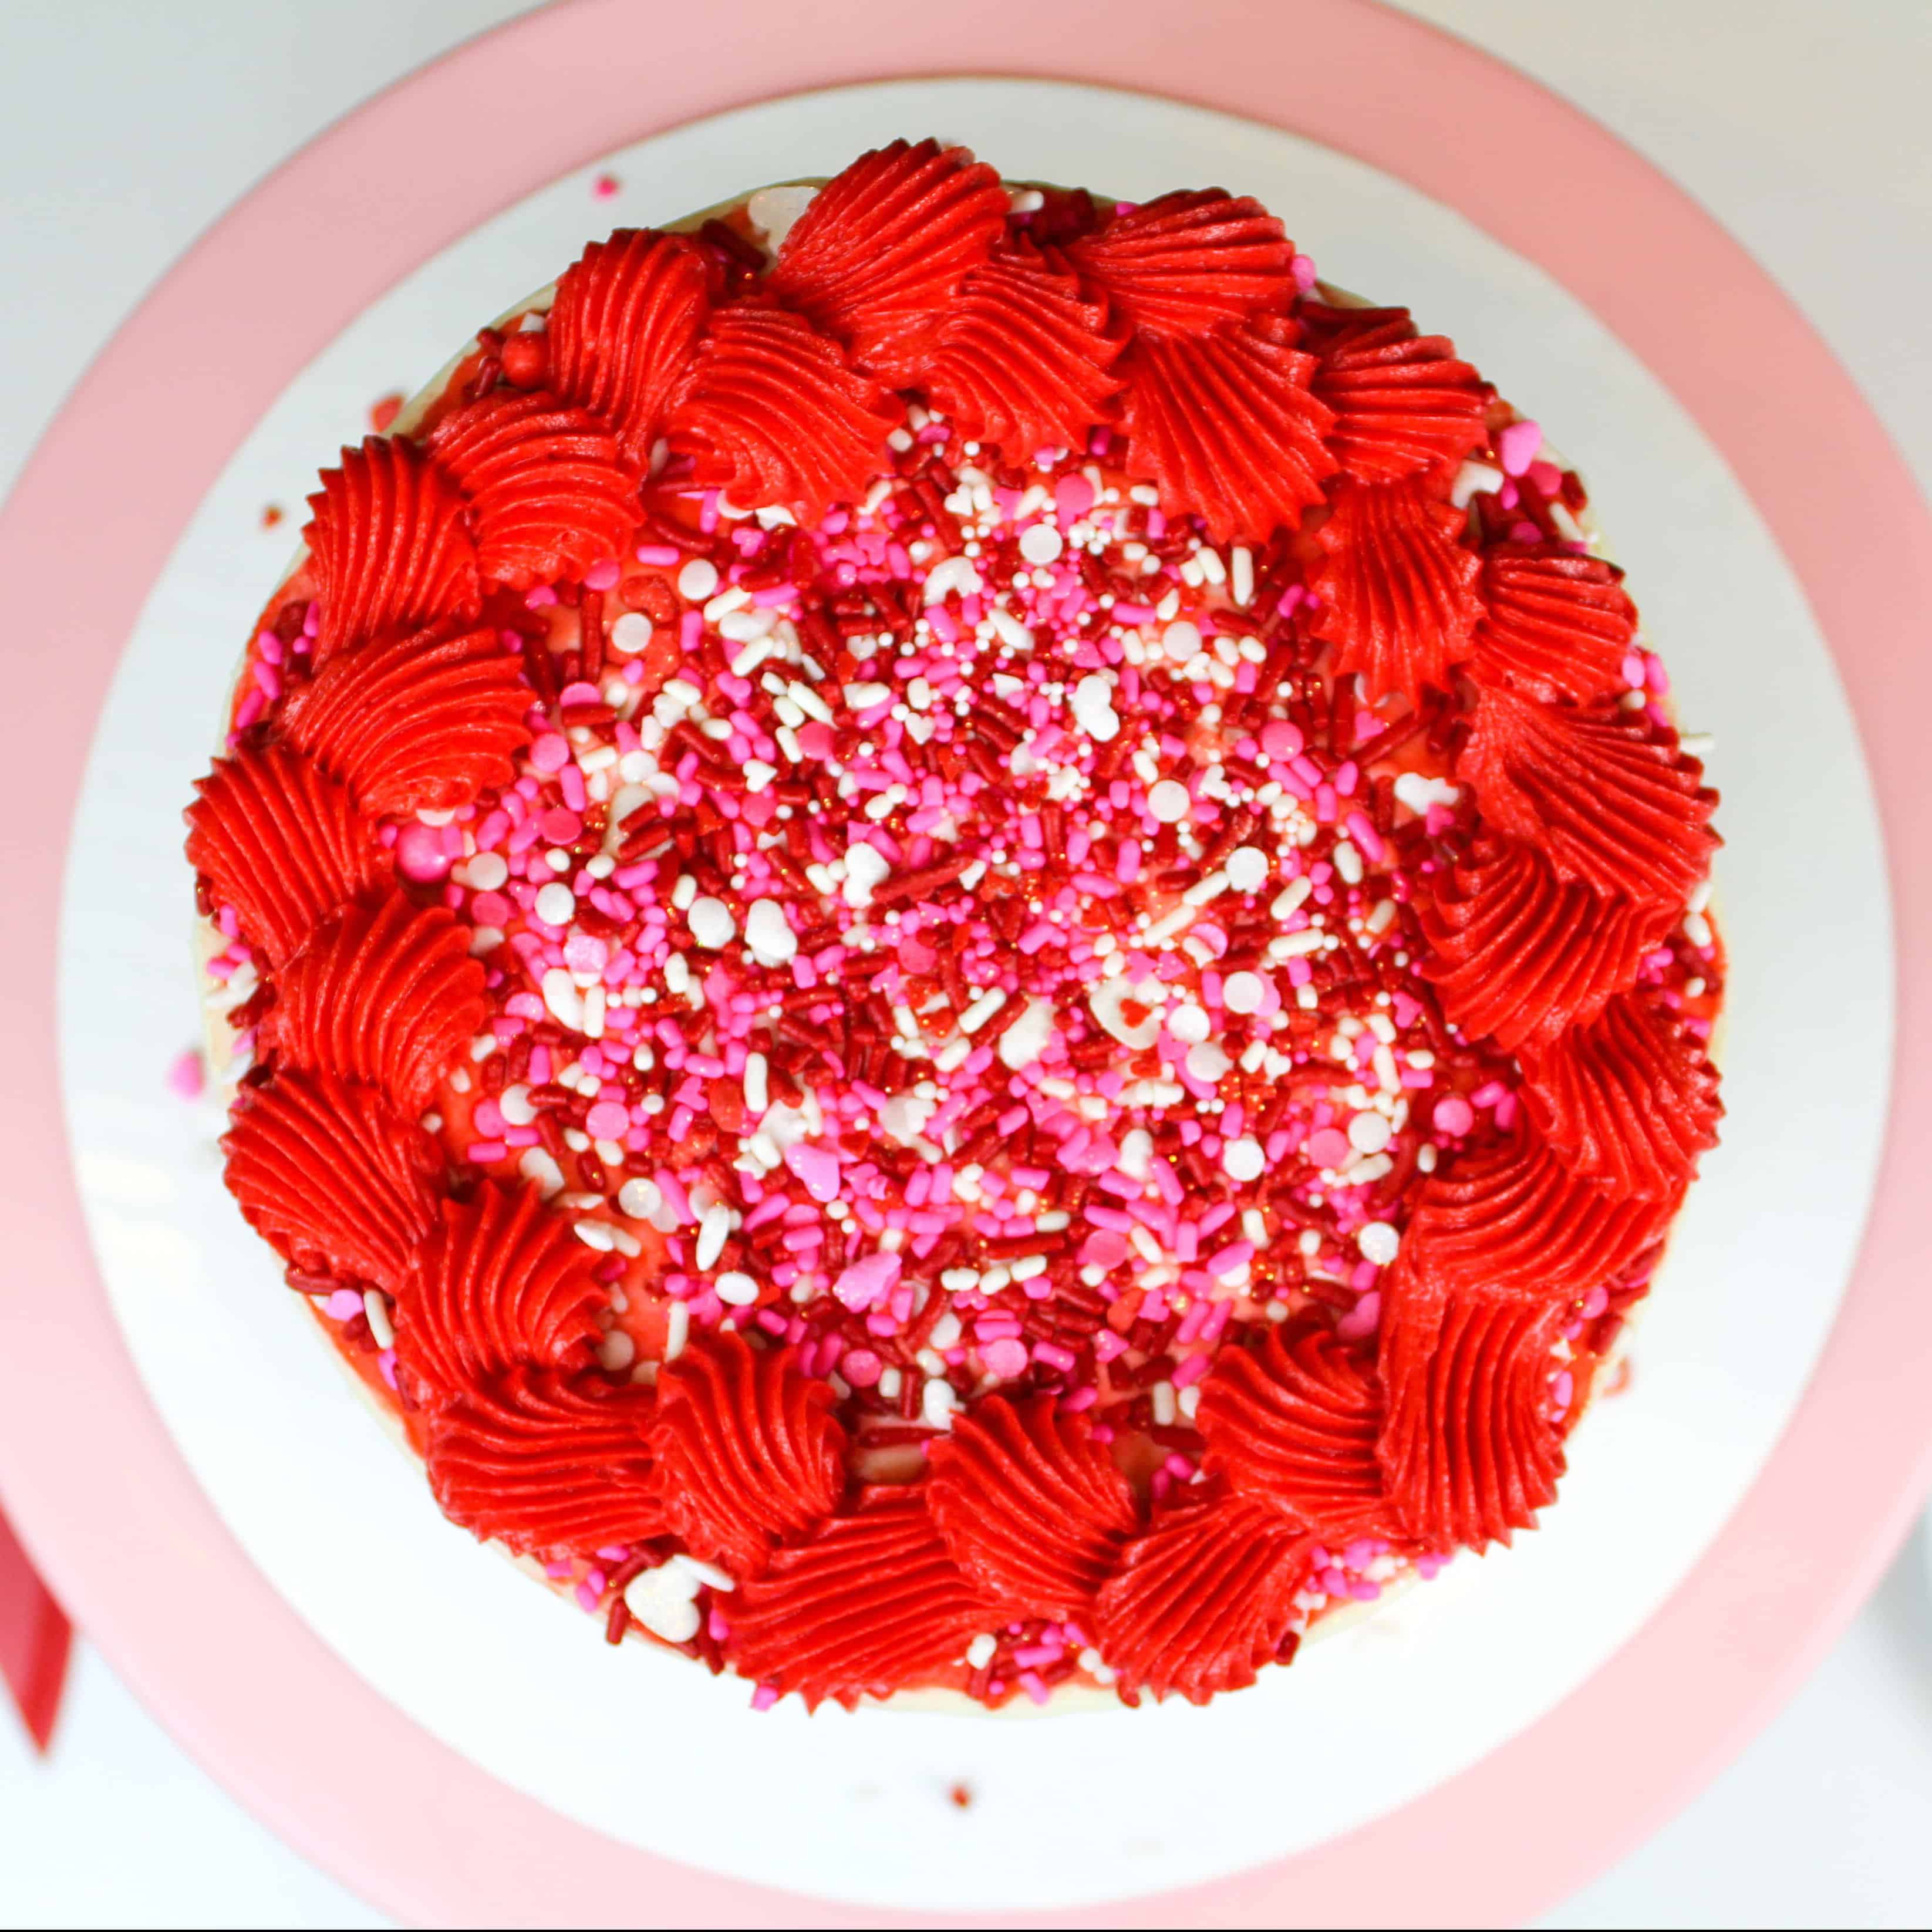 Photo of my Valentine's Day sprinkle cake, with bright red buttercream